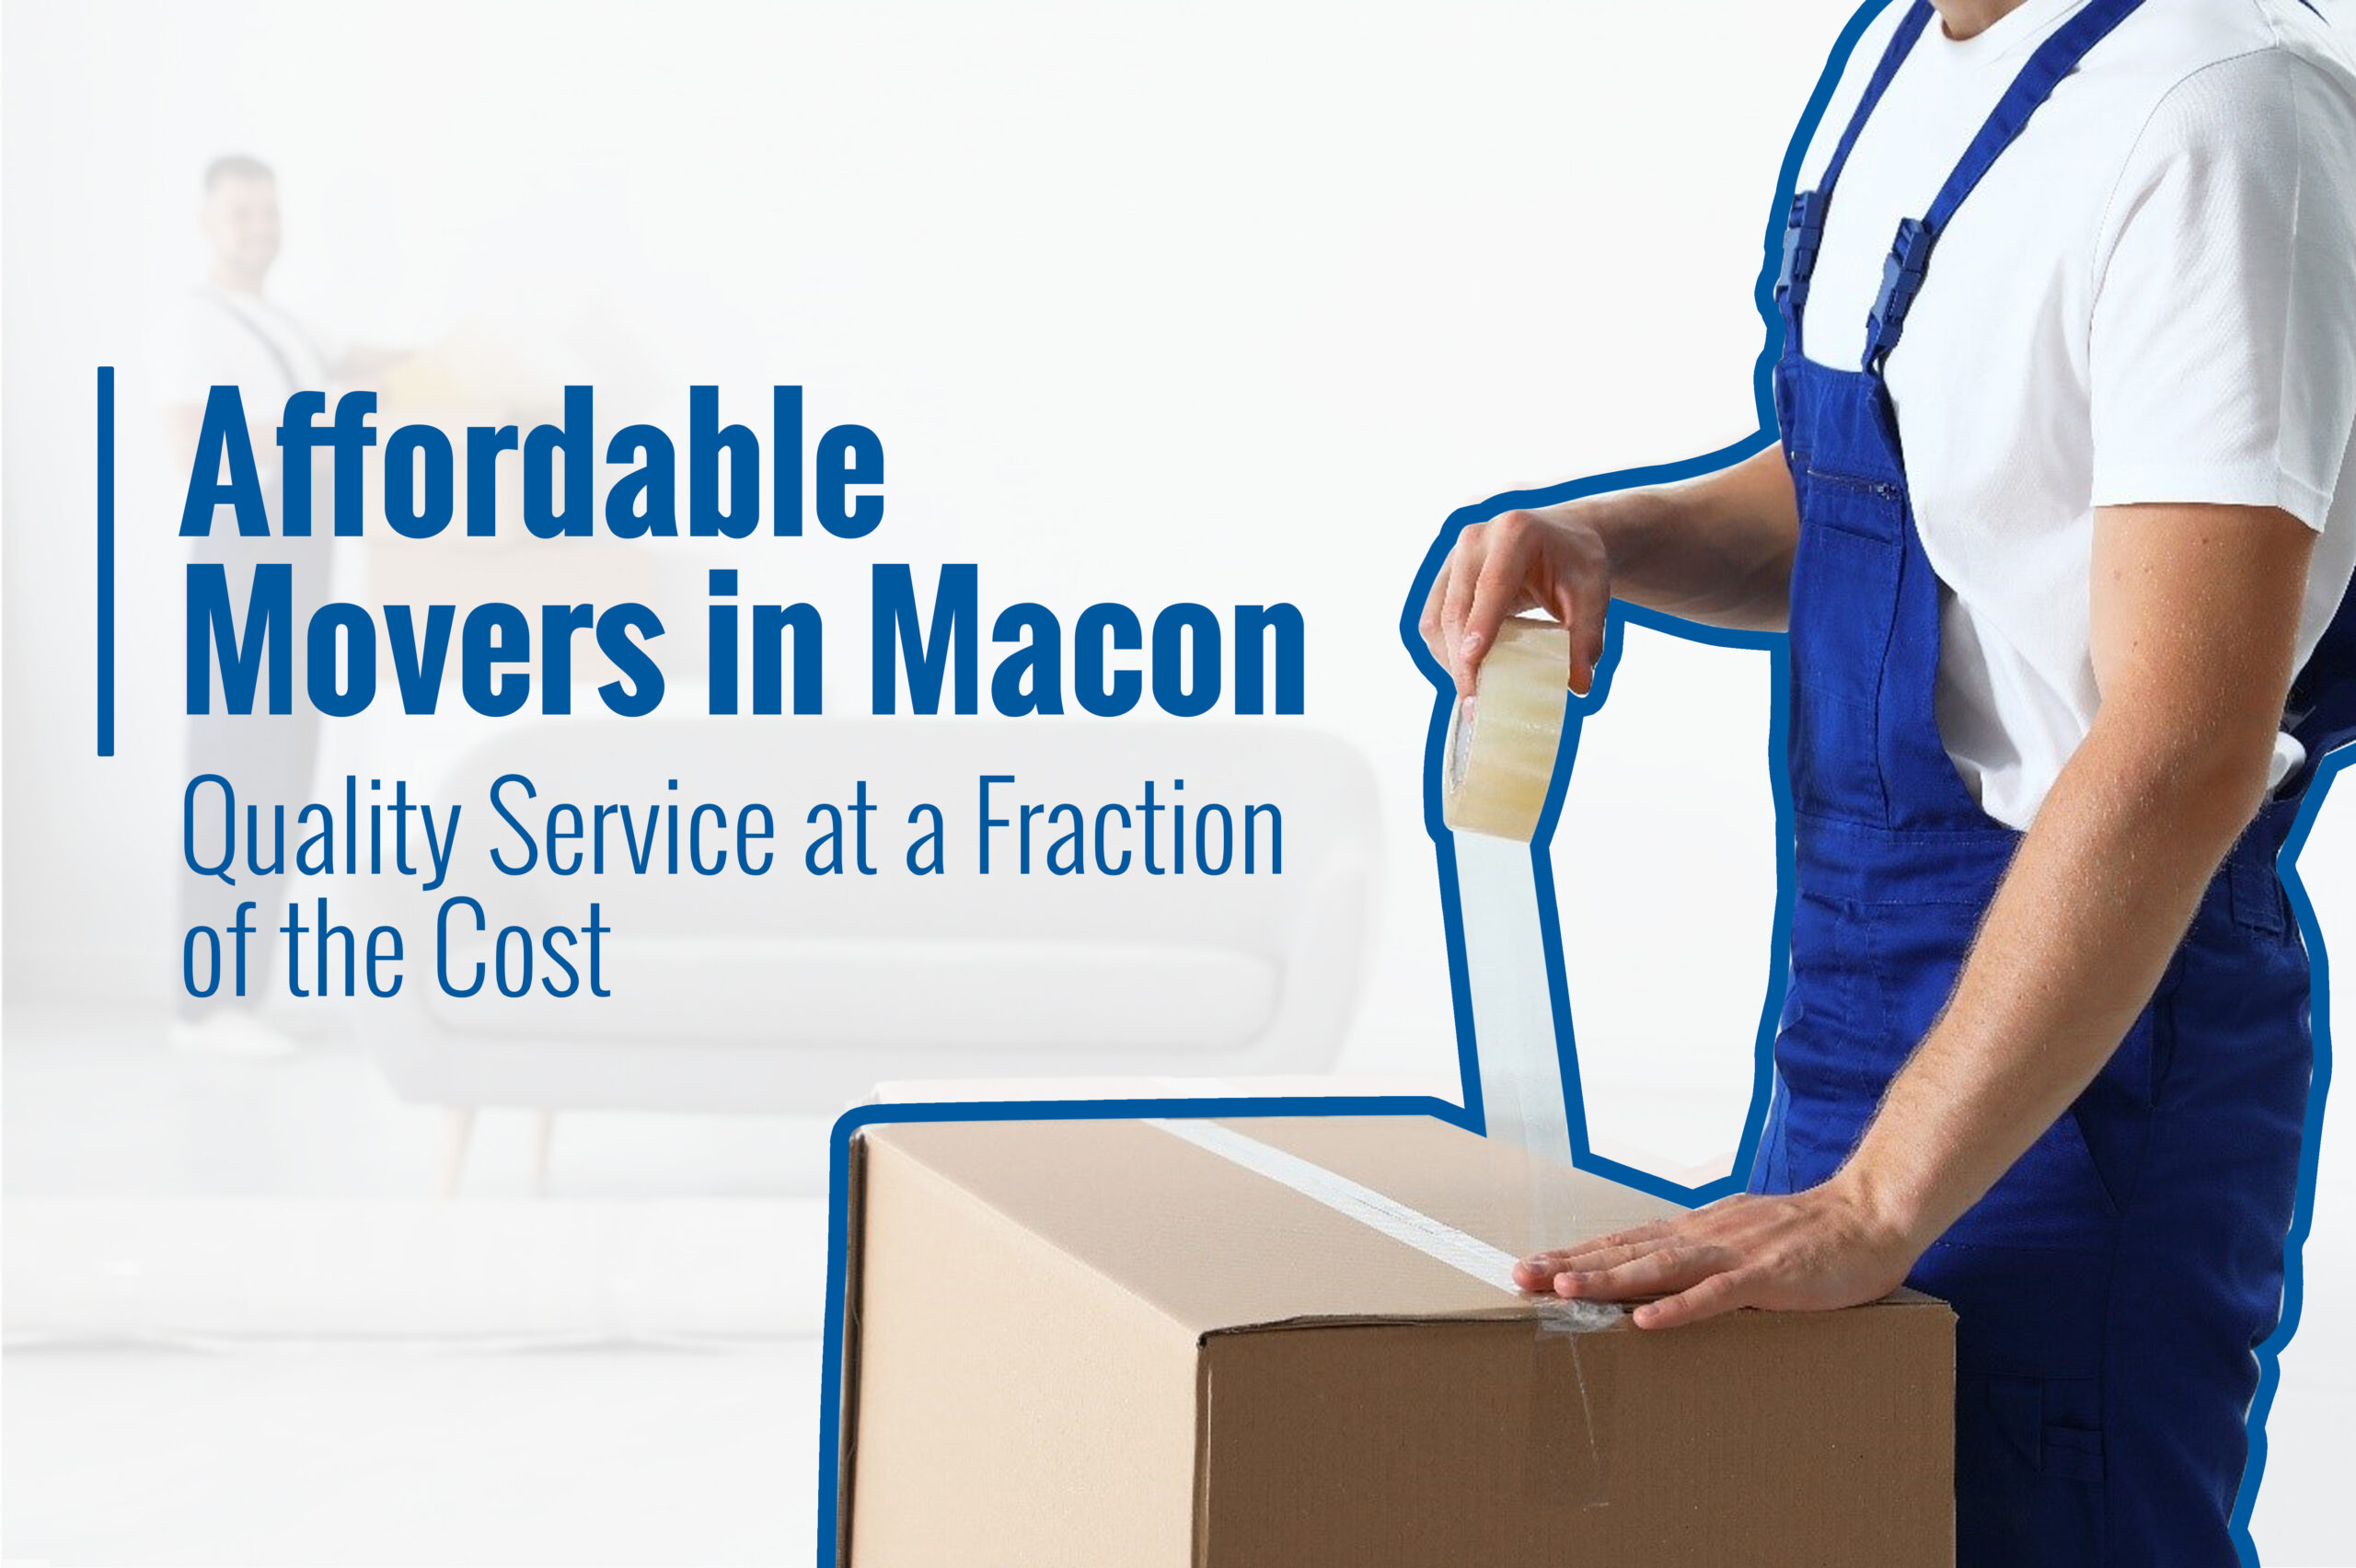 Affordable Movers in Macon, GA Quality Service at a Fraction of the Cost